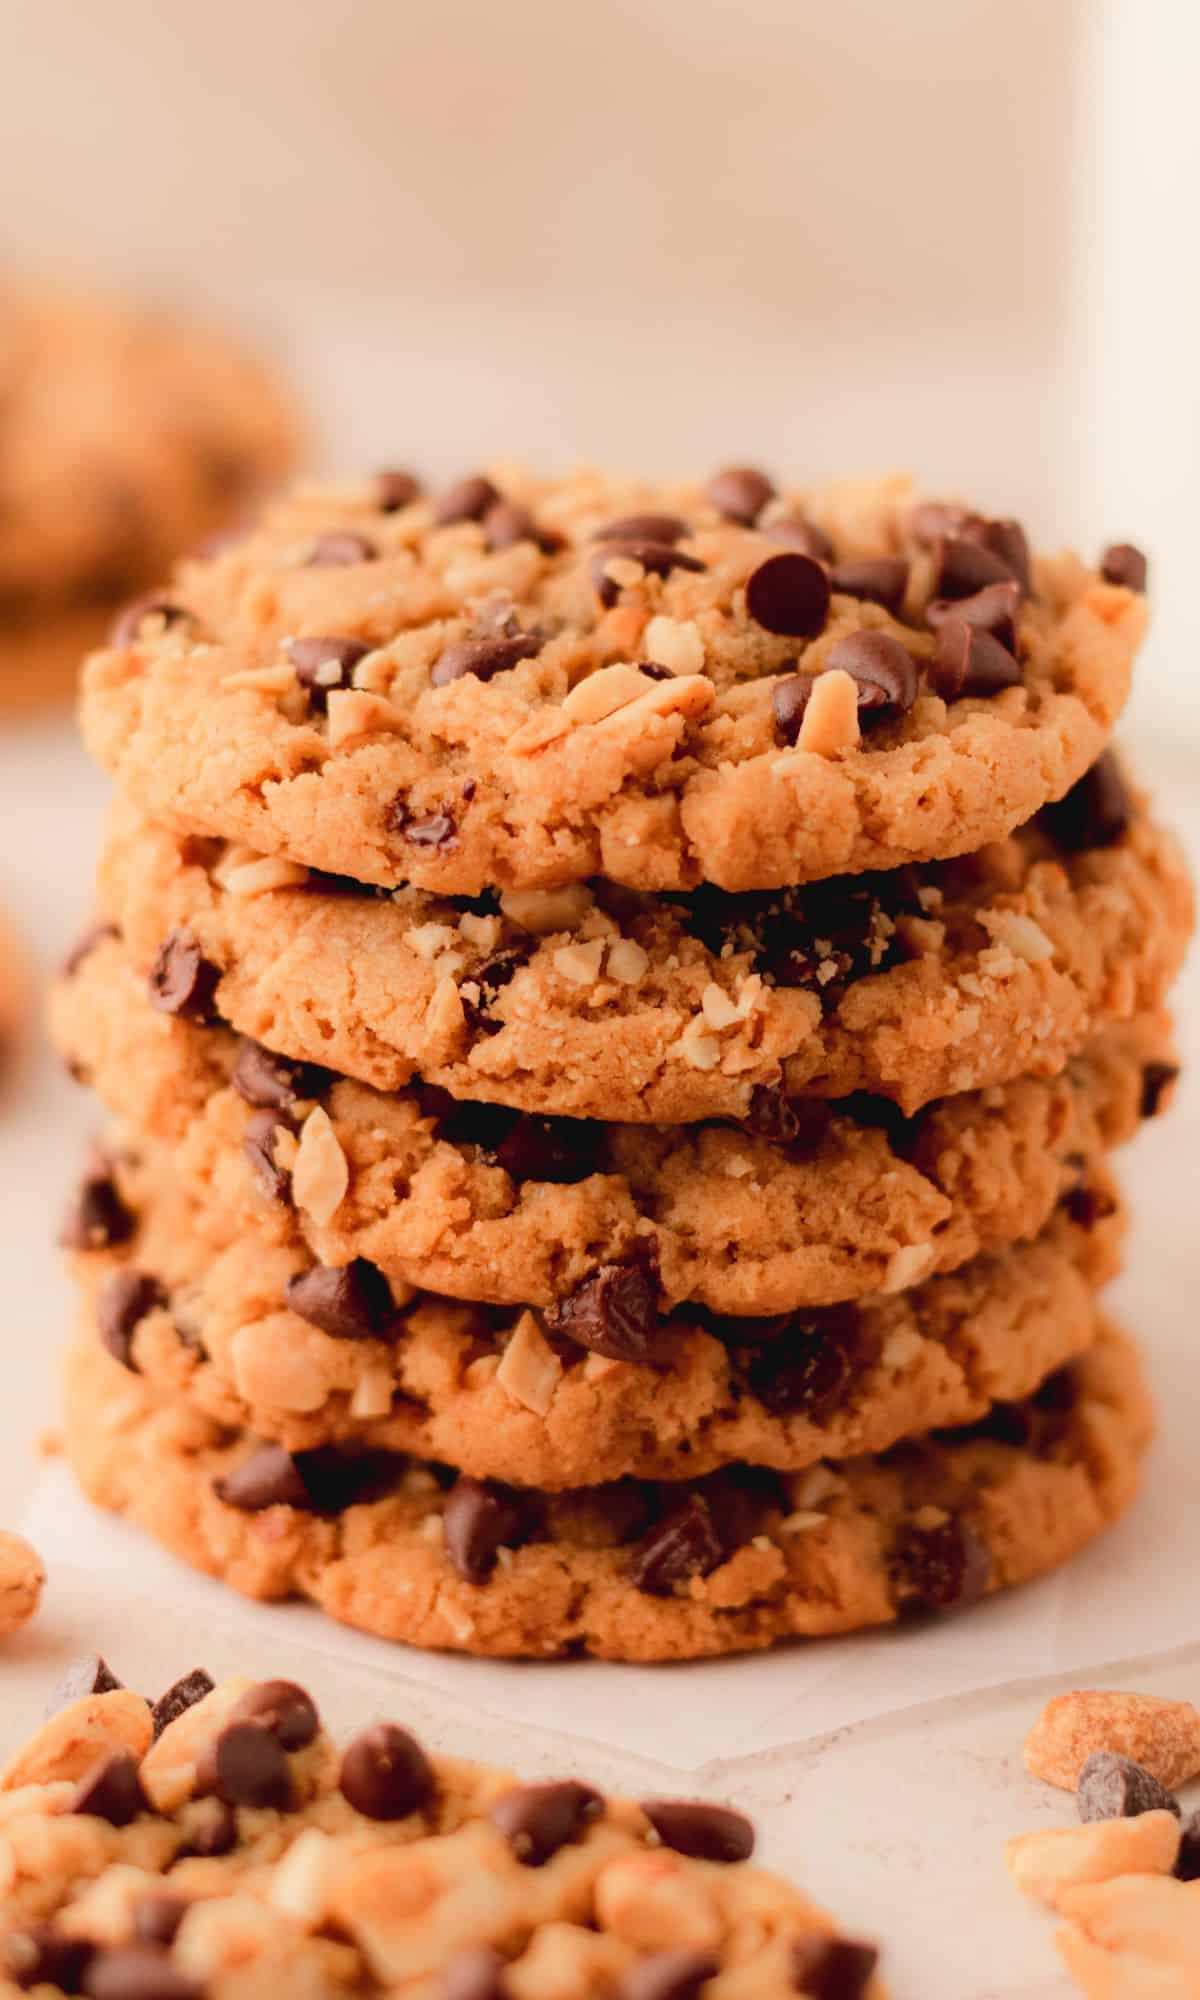 A stack of five peanut butter cookies with chocolate chips.